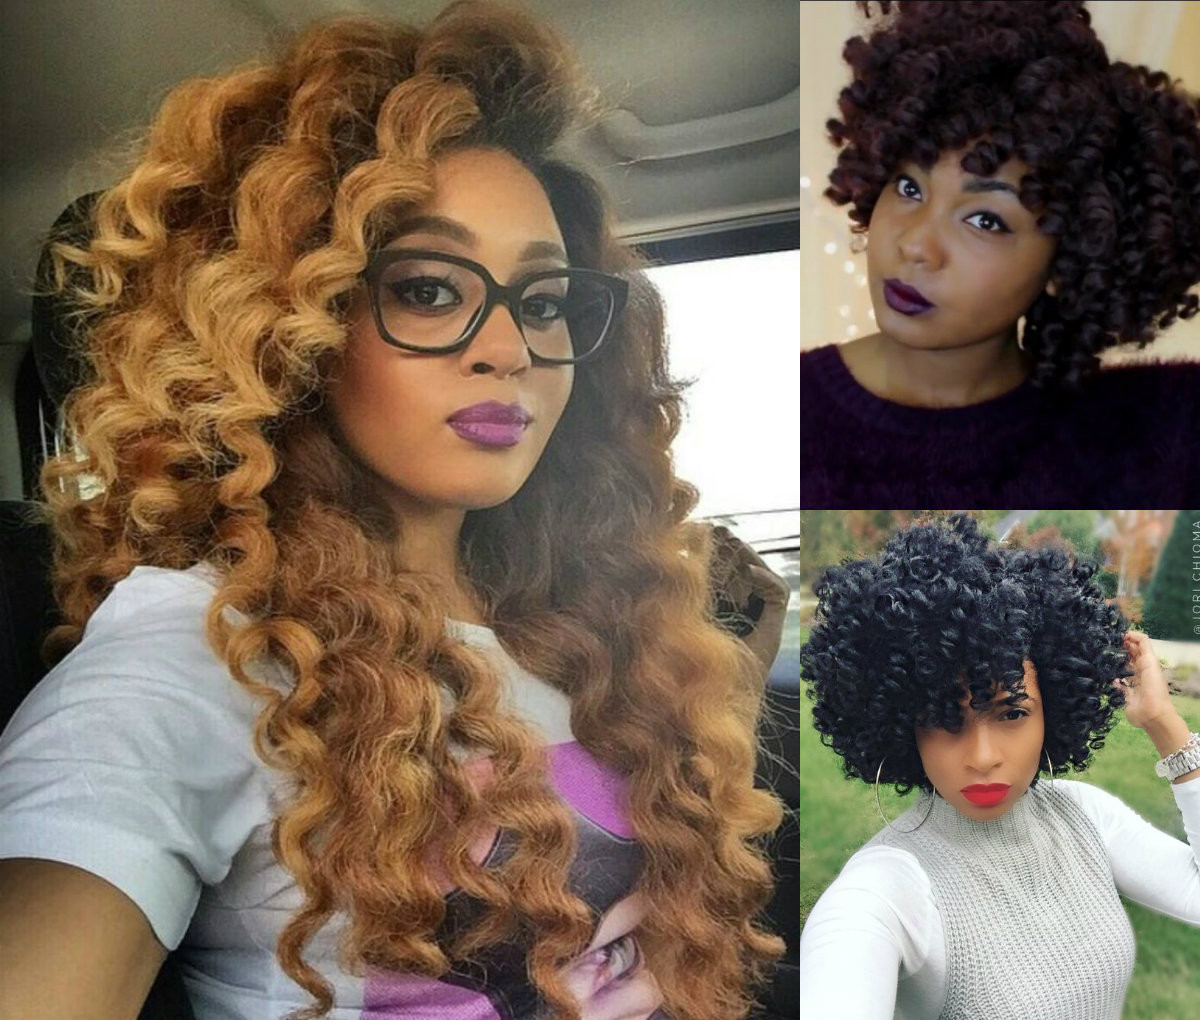 Crochet Hairstyles For Women
 Crochet Braids Hairstyles For Lovely Curly Look